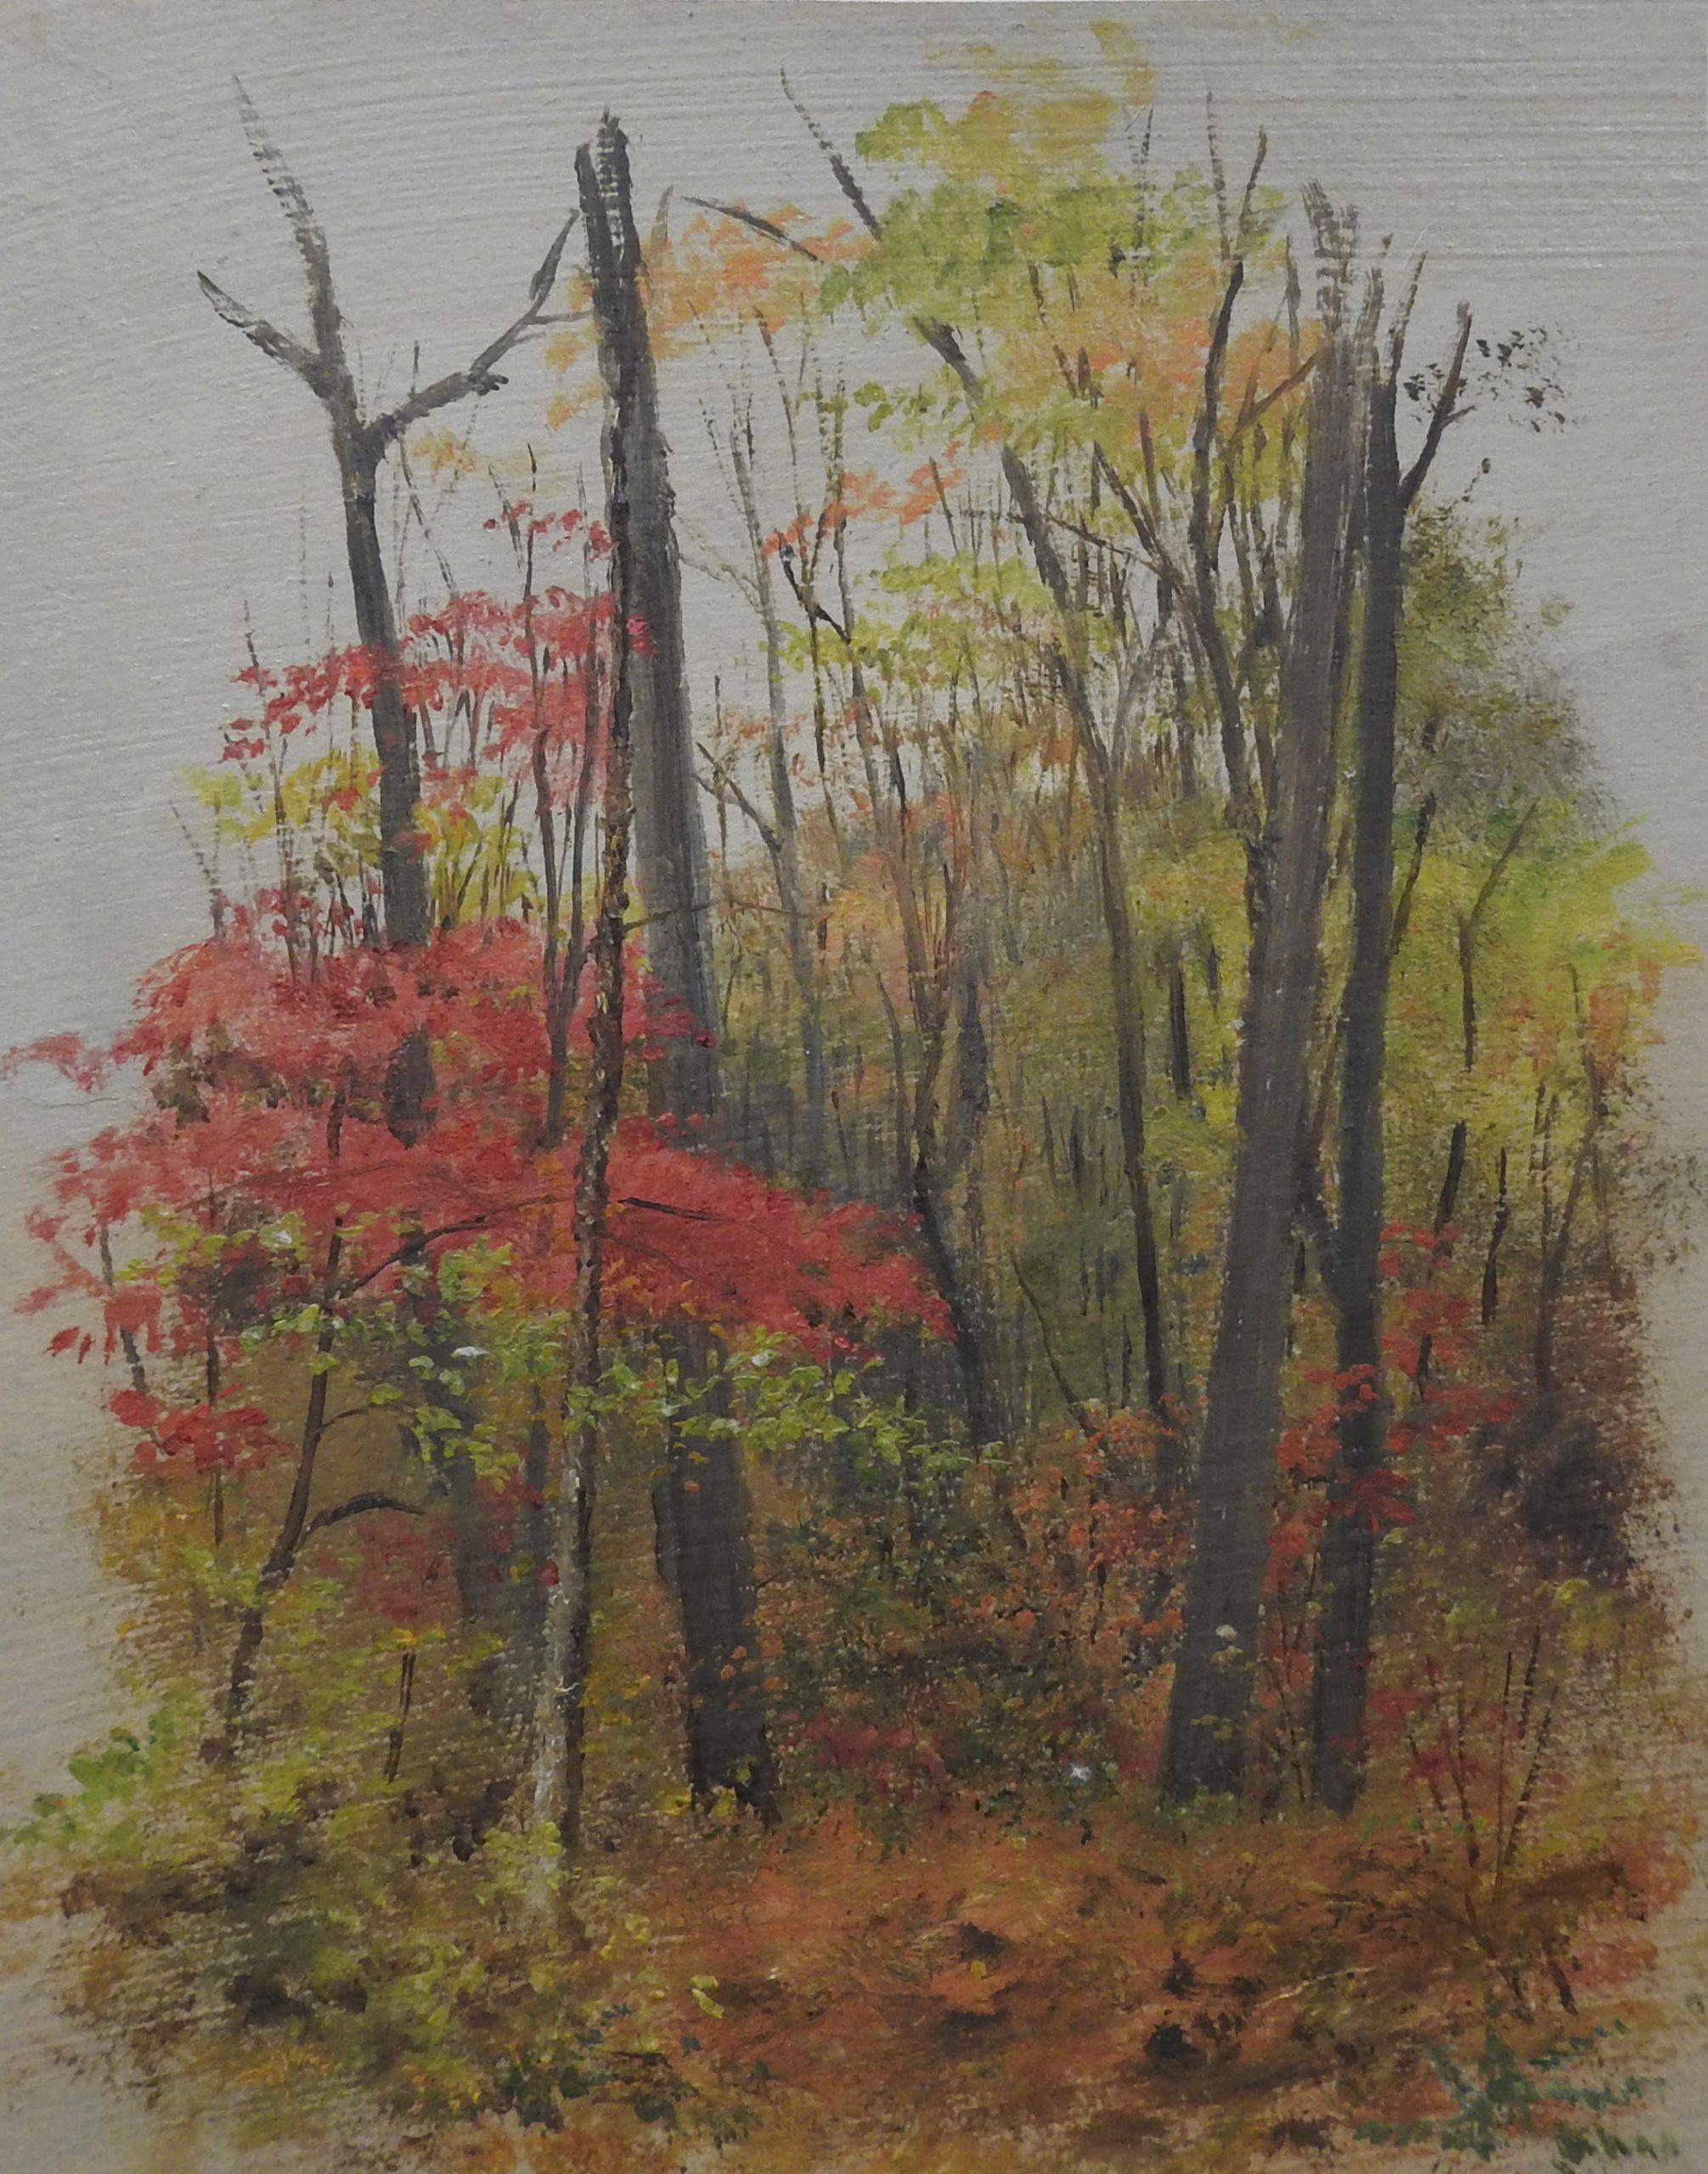 Vignette of a wooded scene in fall with red and orange foliage.